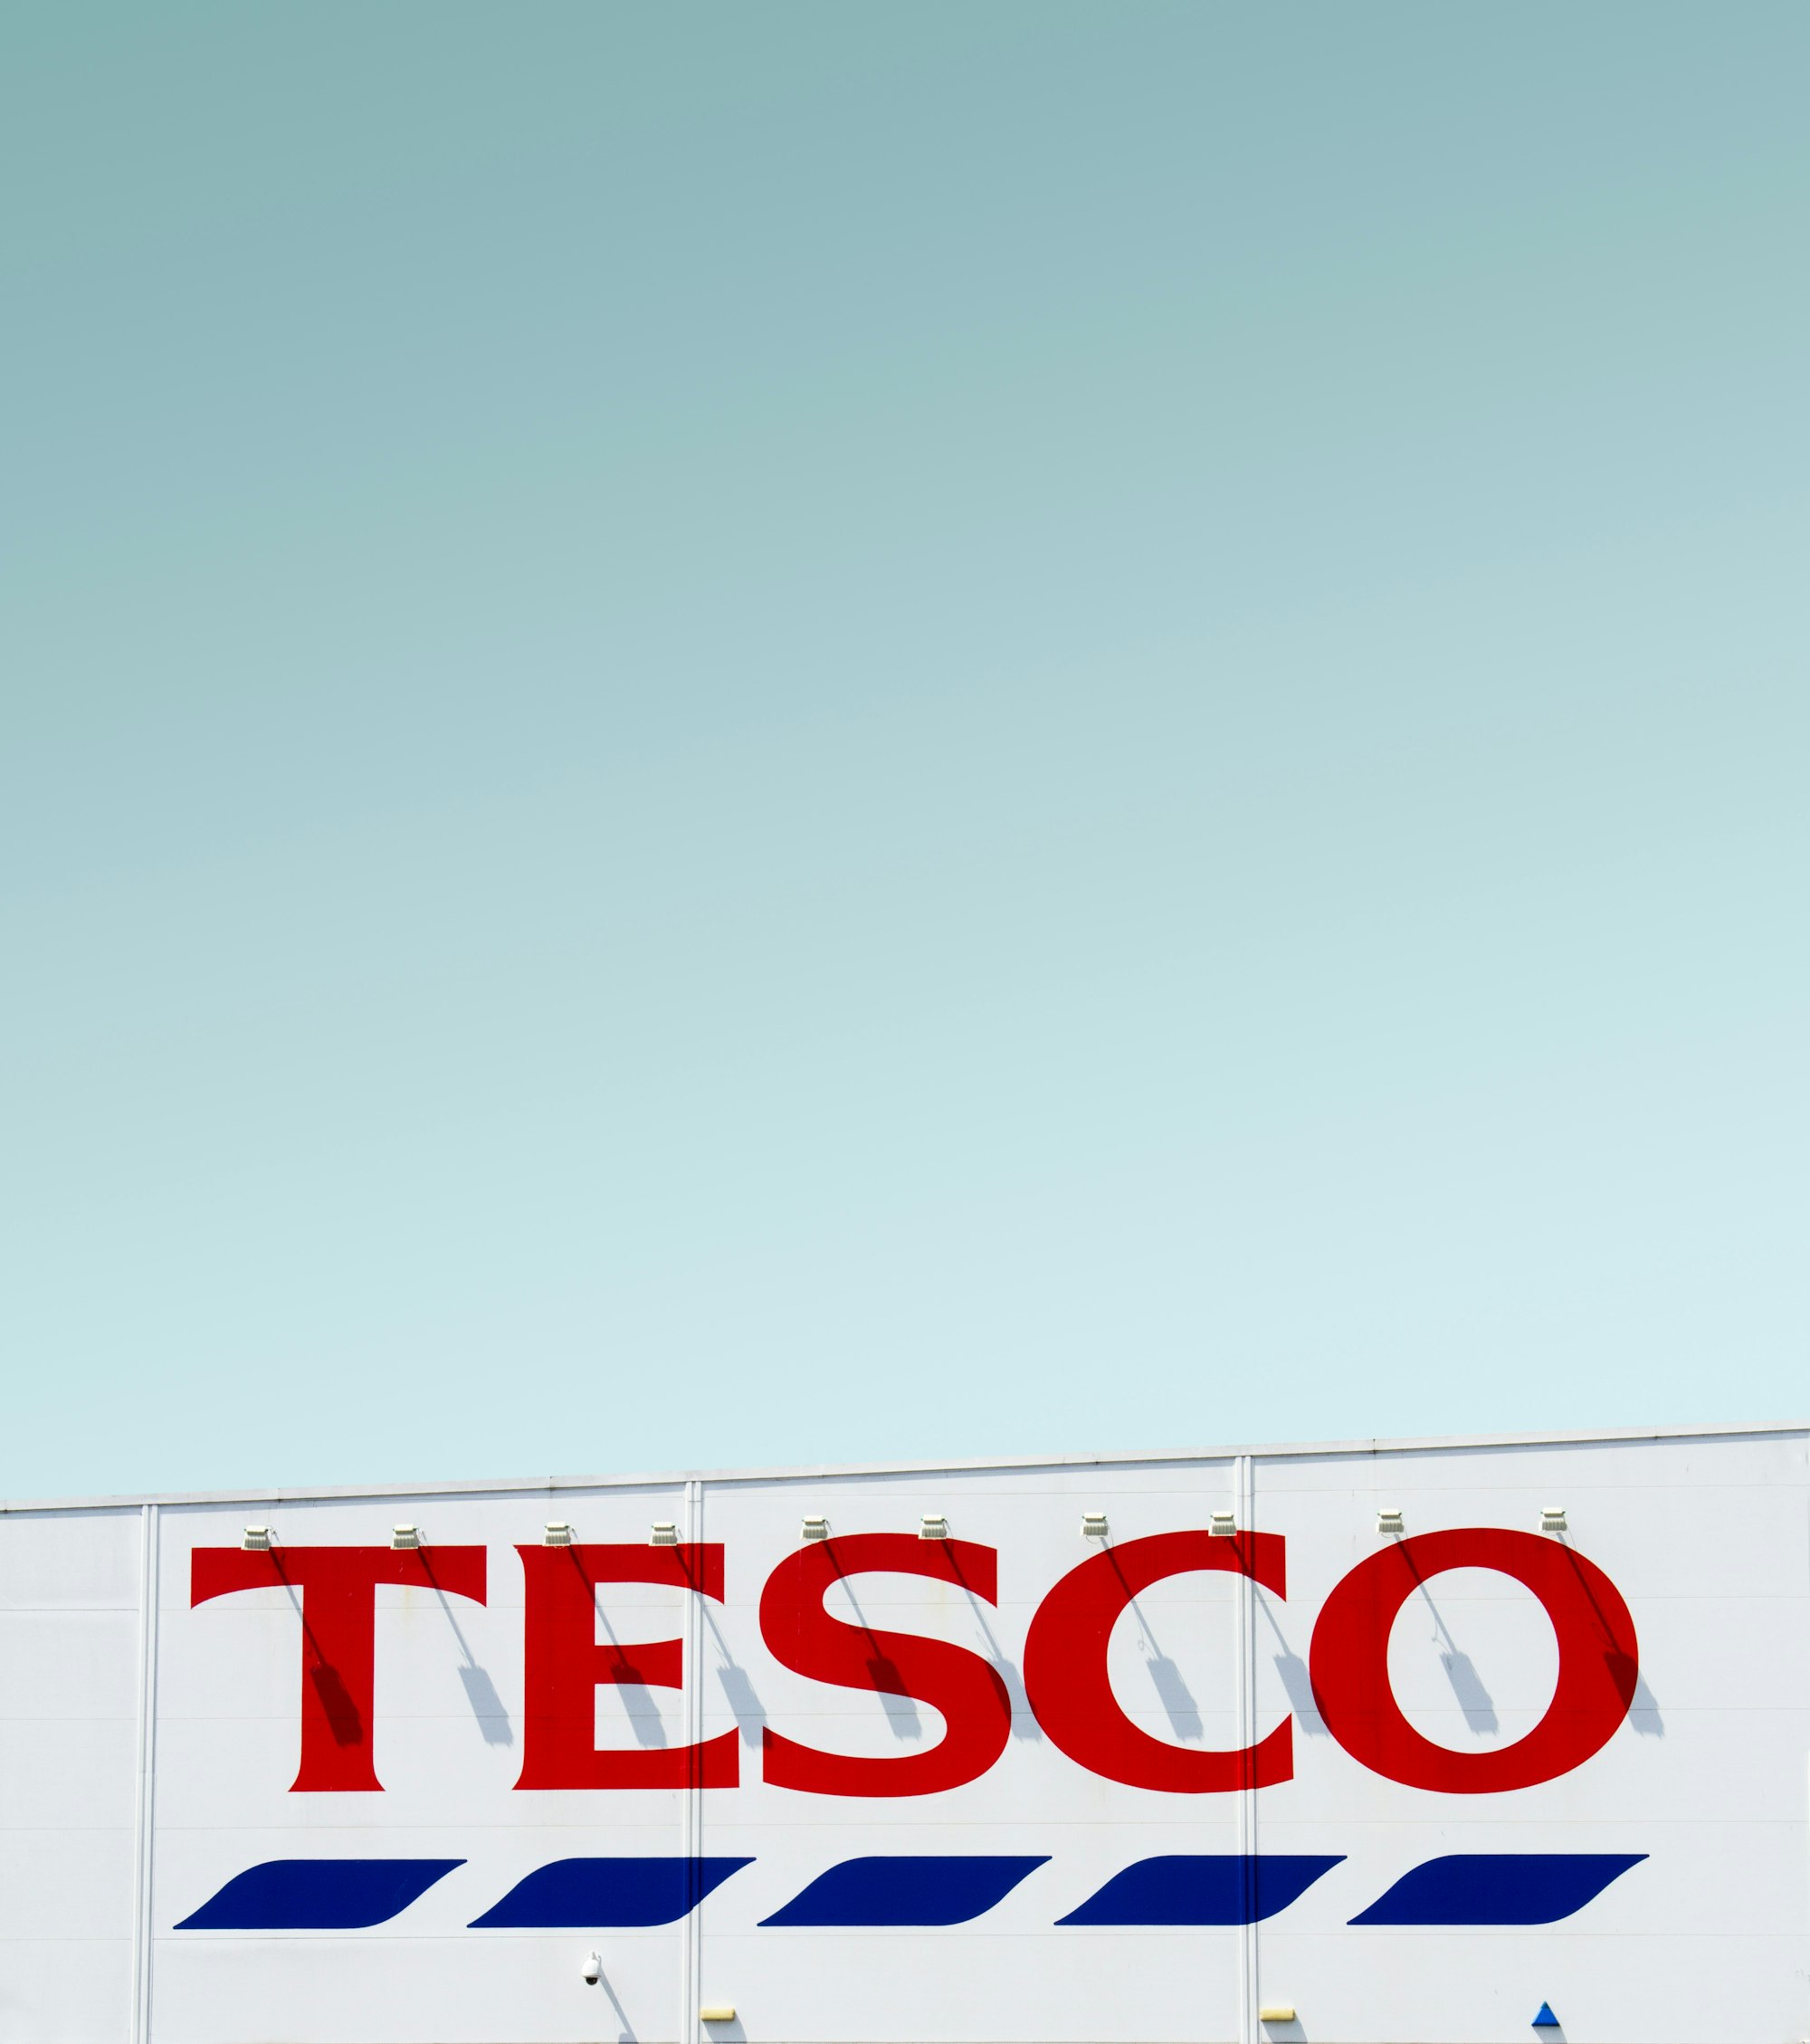 Crumlin man is alleged to have stolen from Tesco on 20 different dates